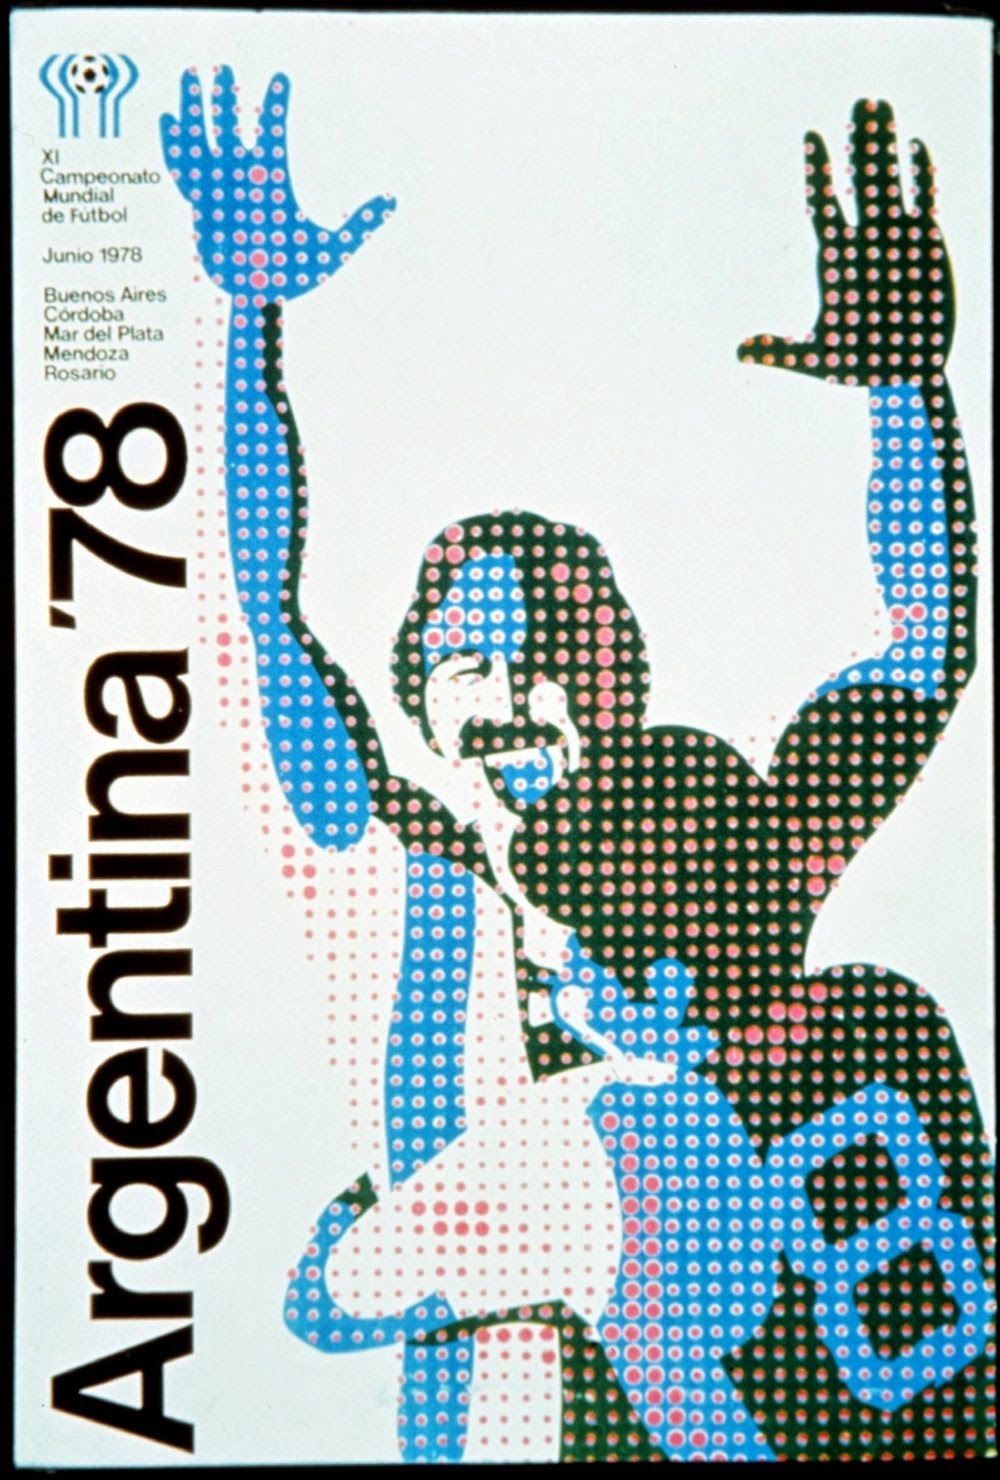 Vintage World Cup Posters Argentina 1978